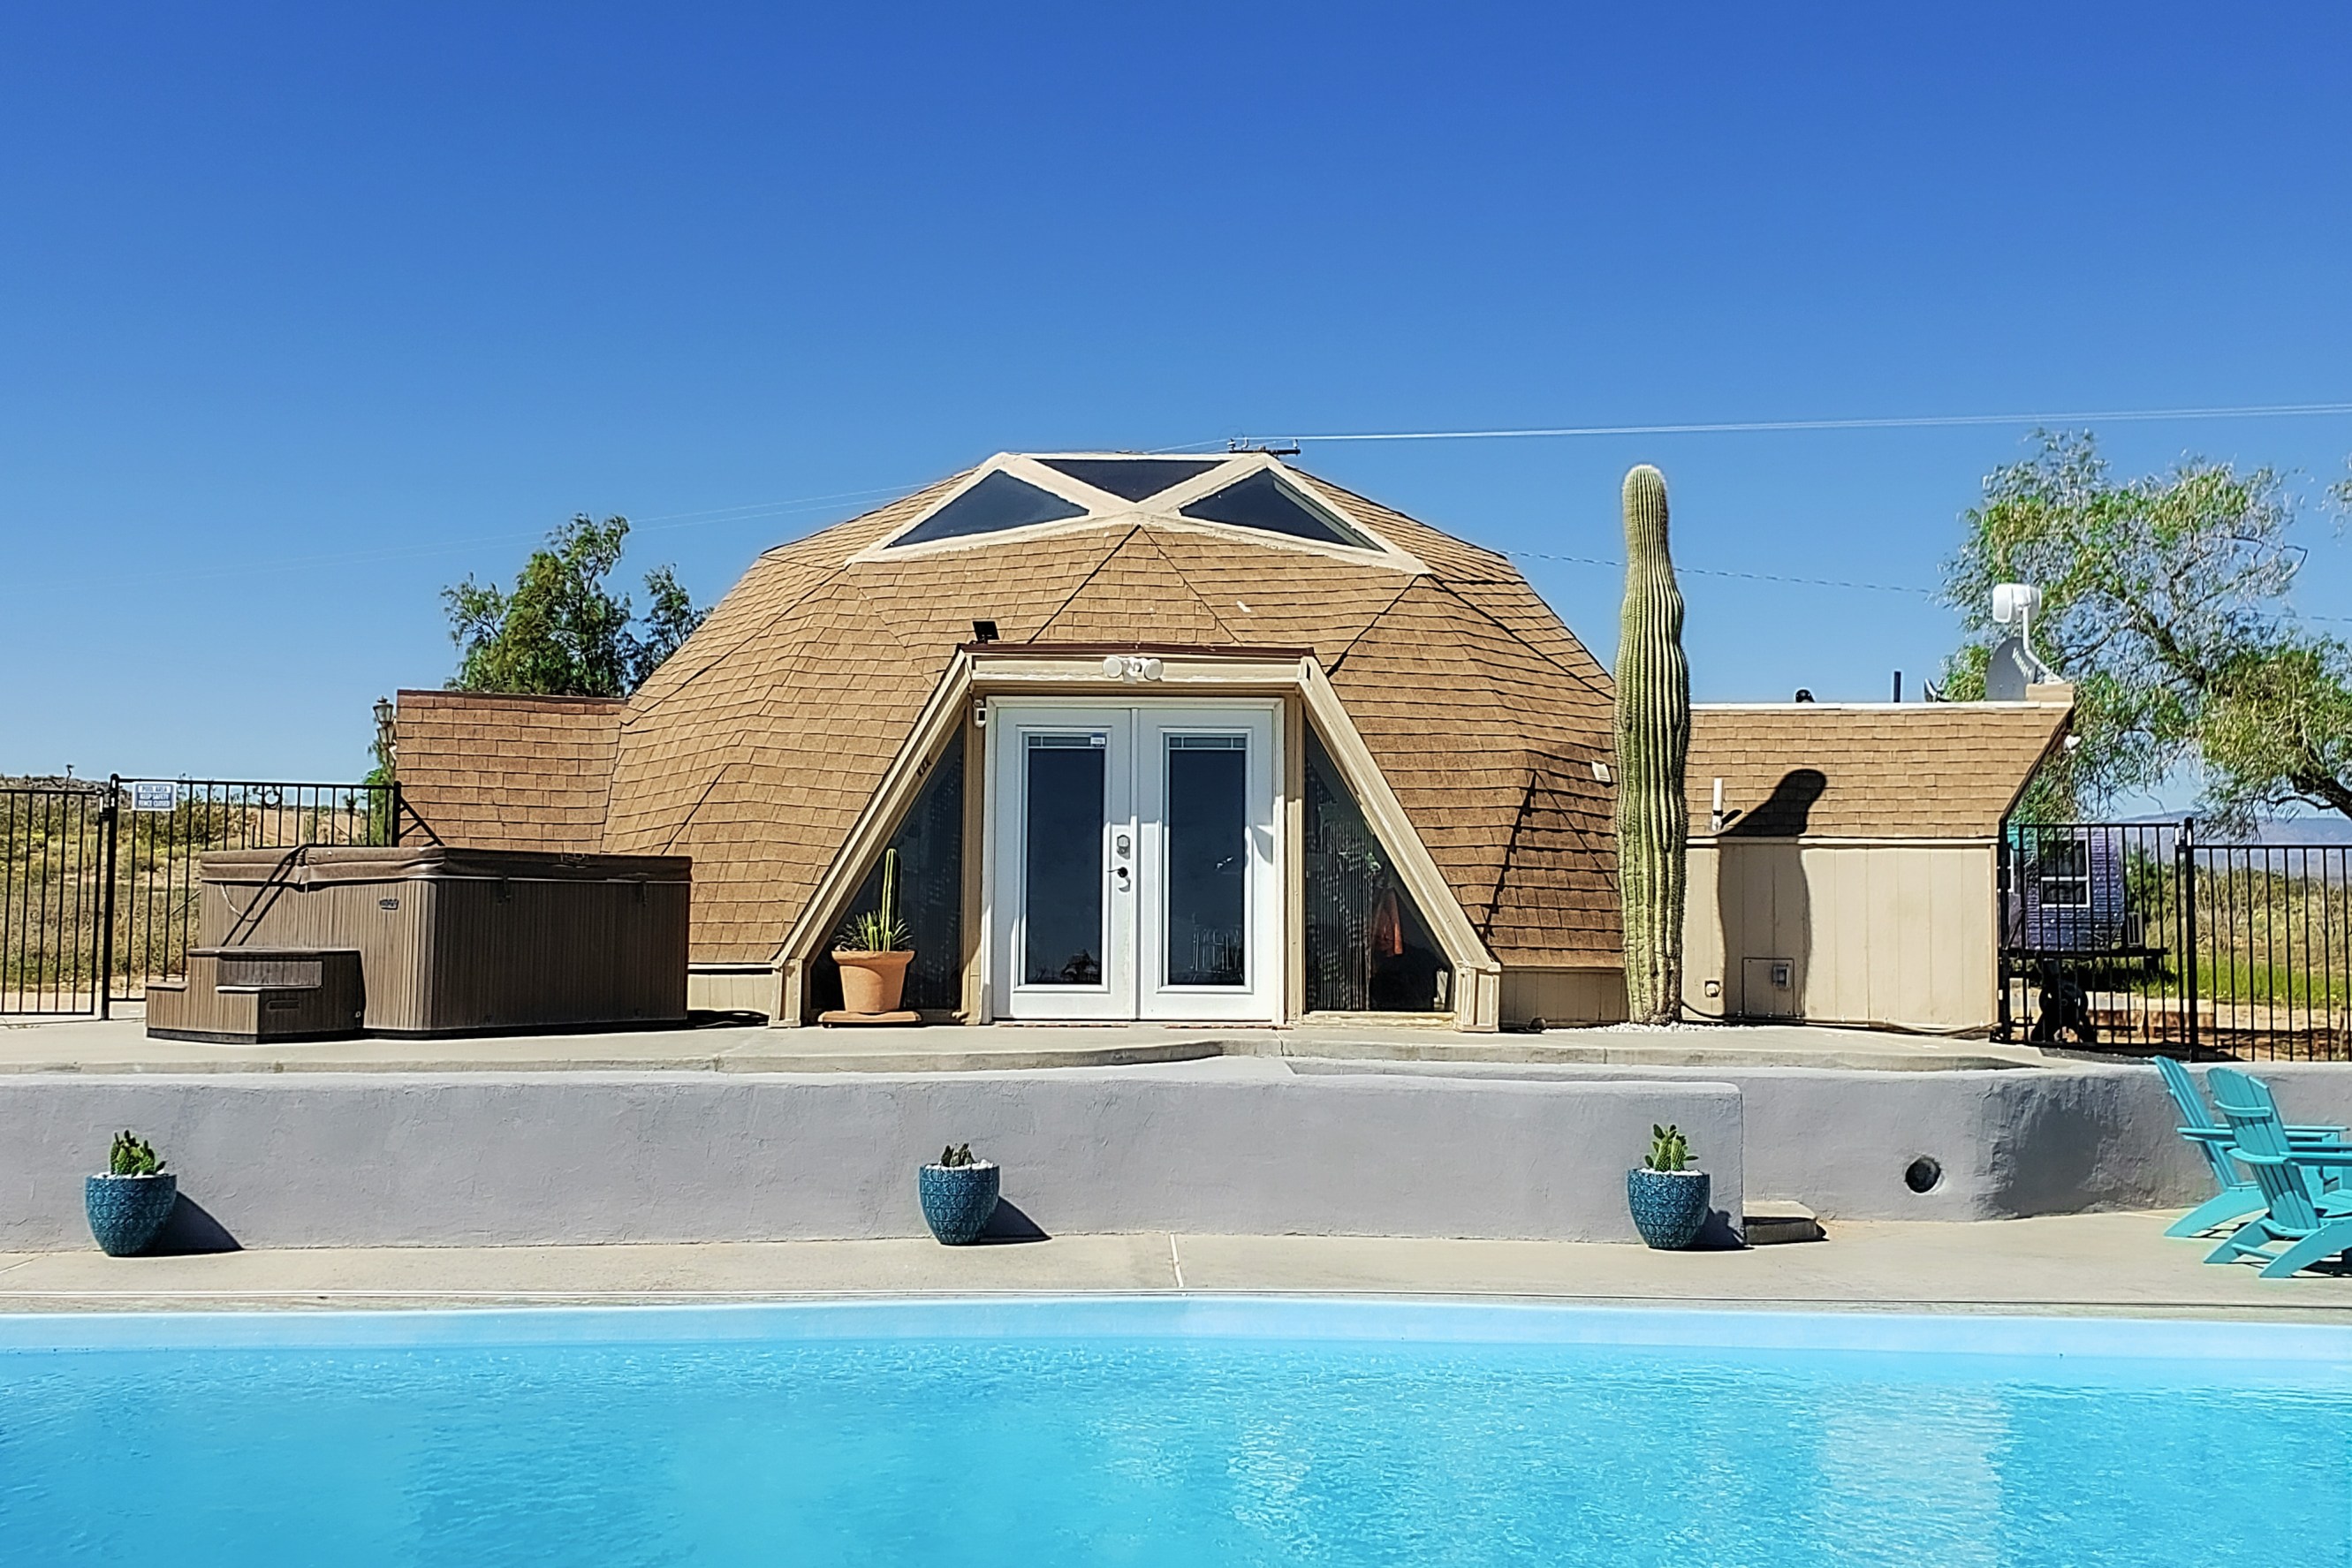 Dome house with swimming pool in the foreground and desert landscape in the background.